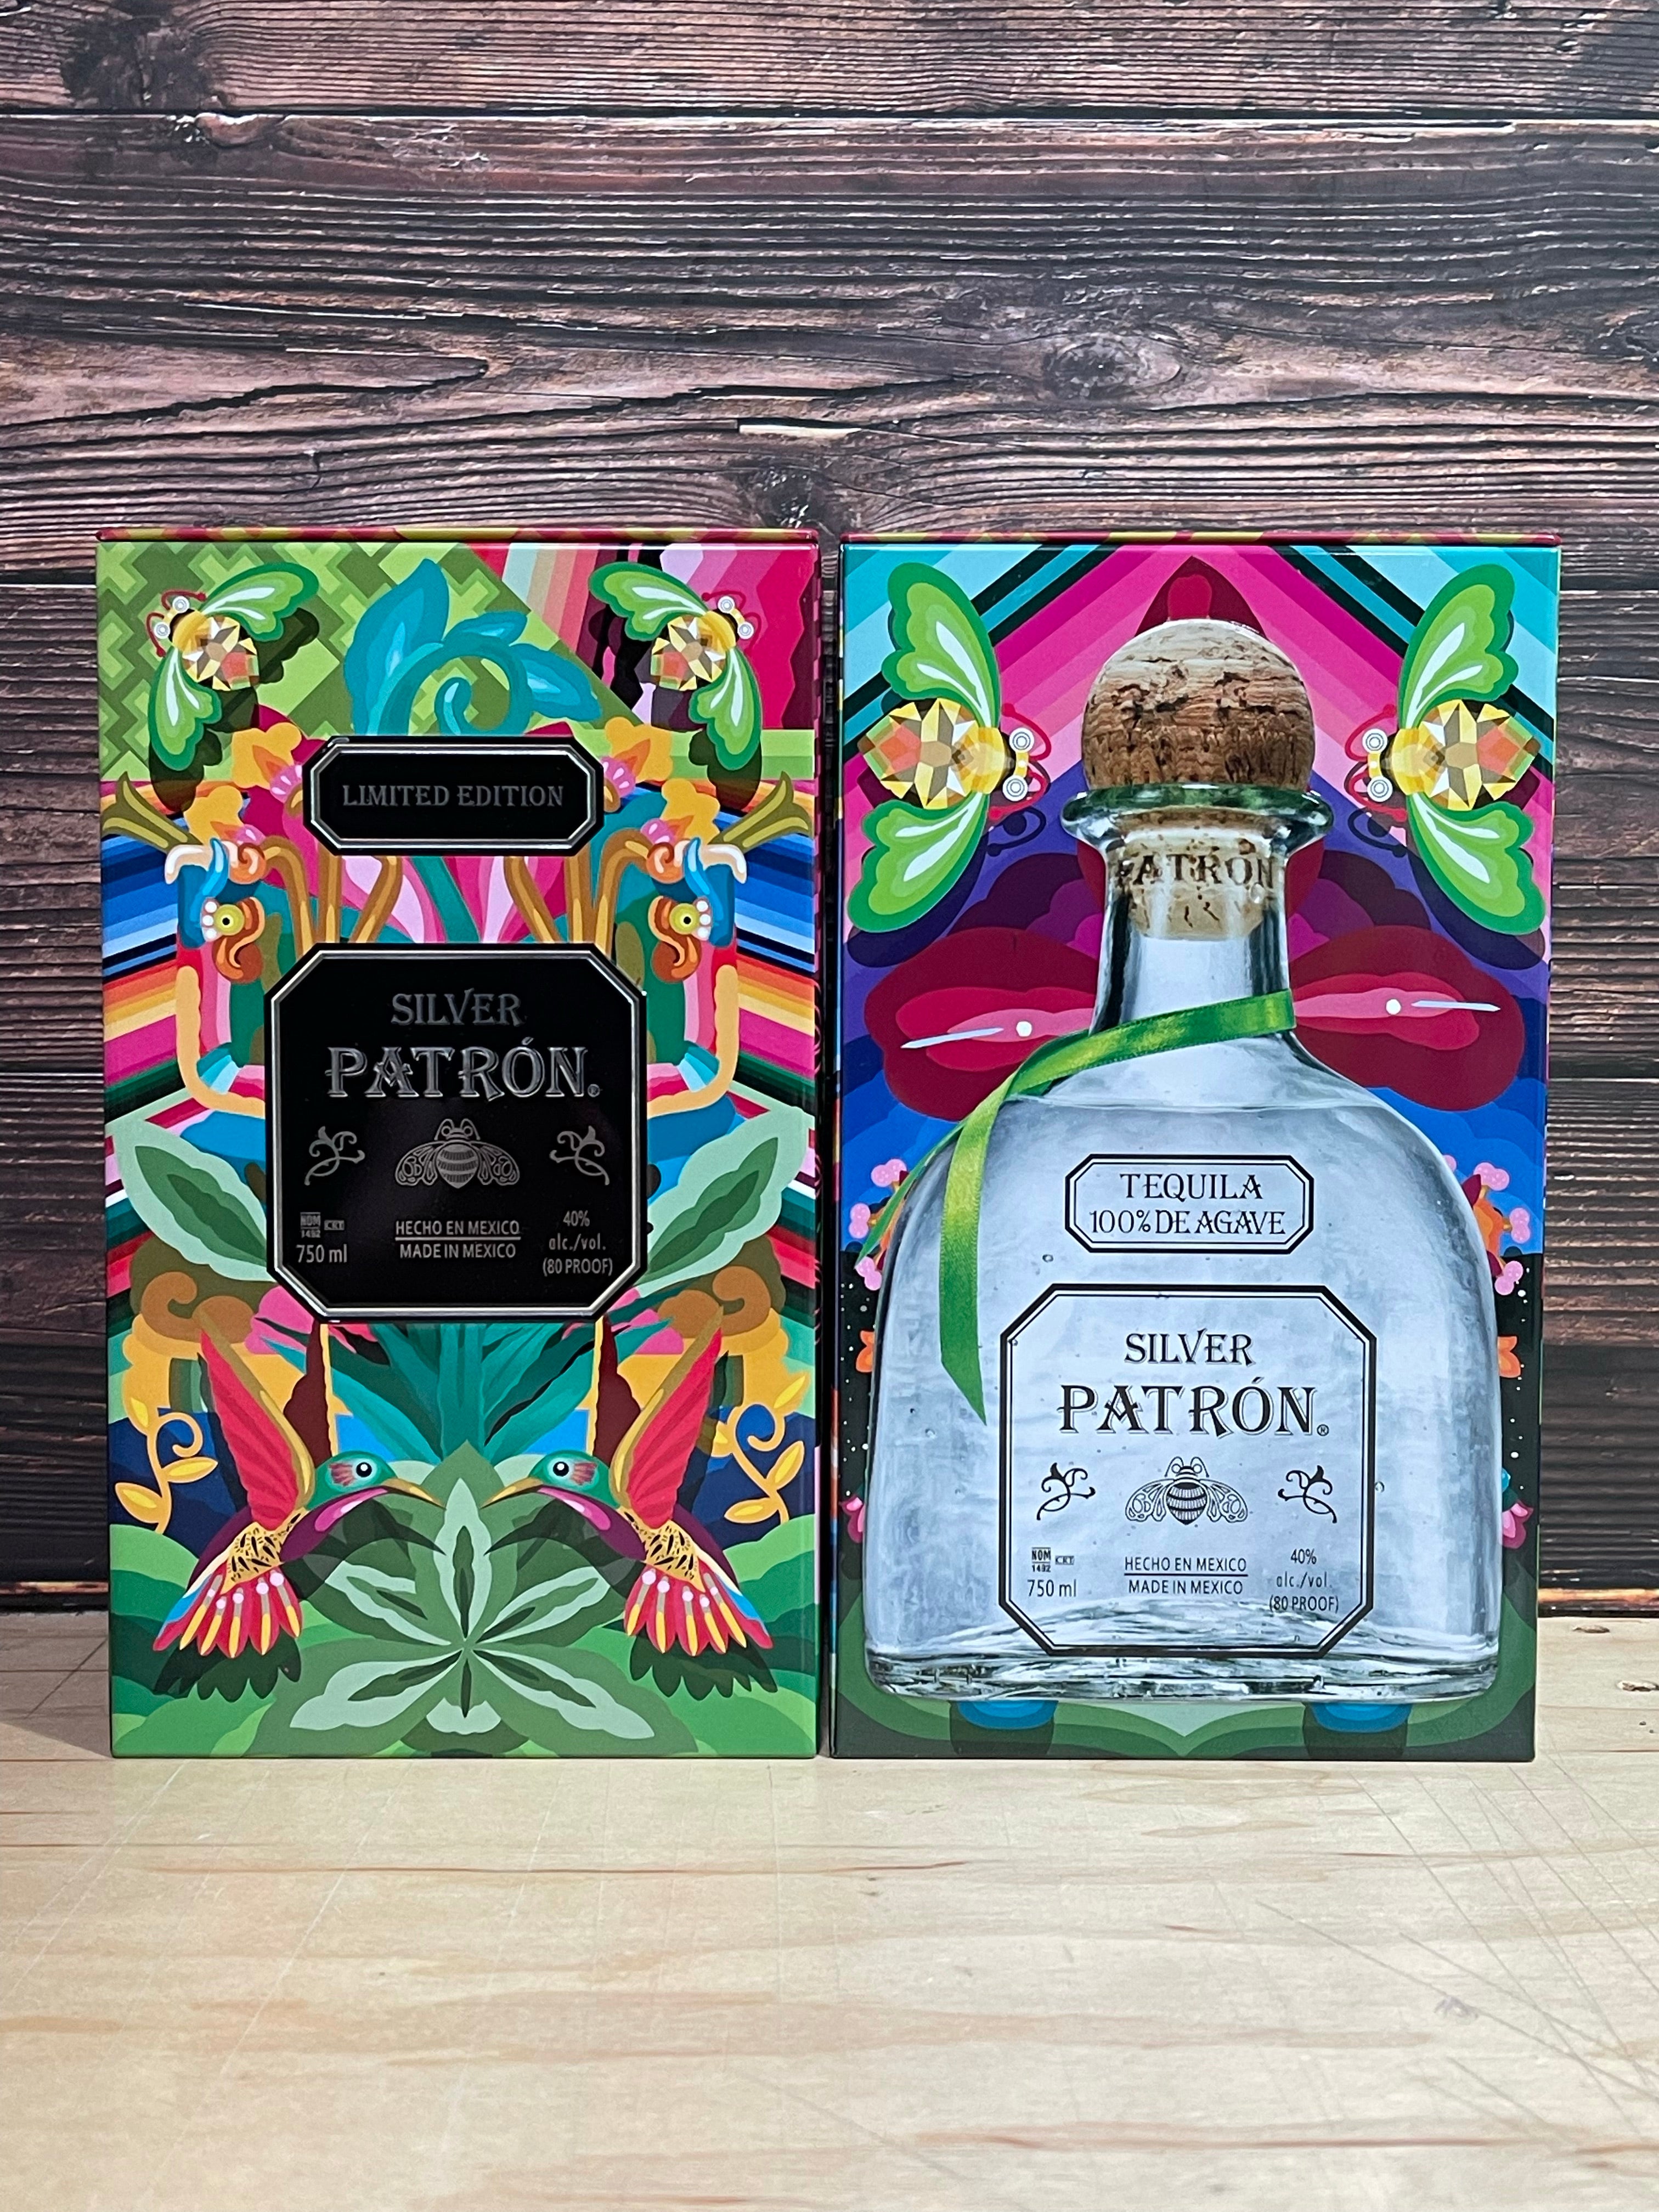 Patron Silver Tequila x2 Mexican Heritage Tin Box Bundle Set (2021 Limited Edition)